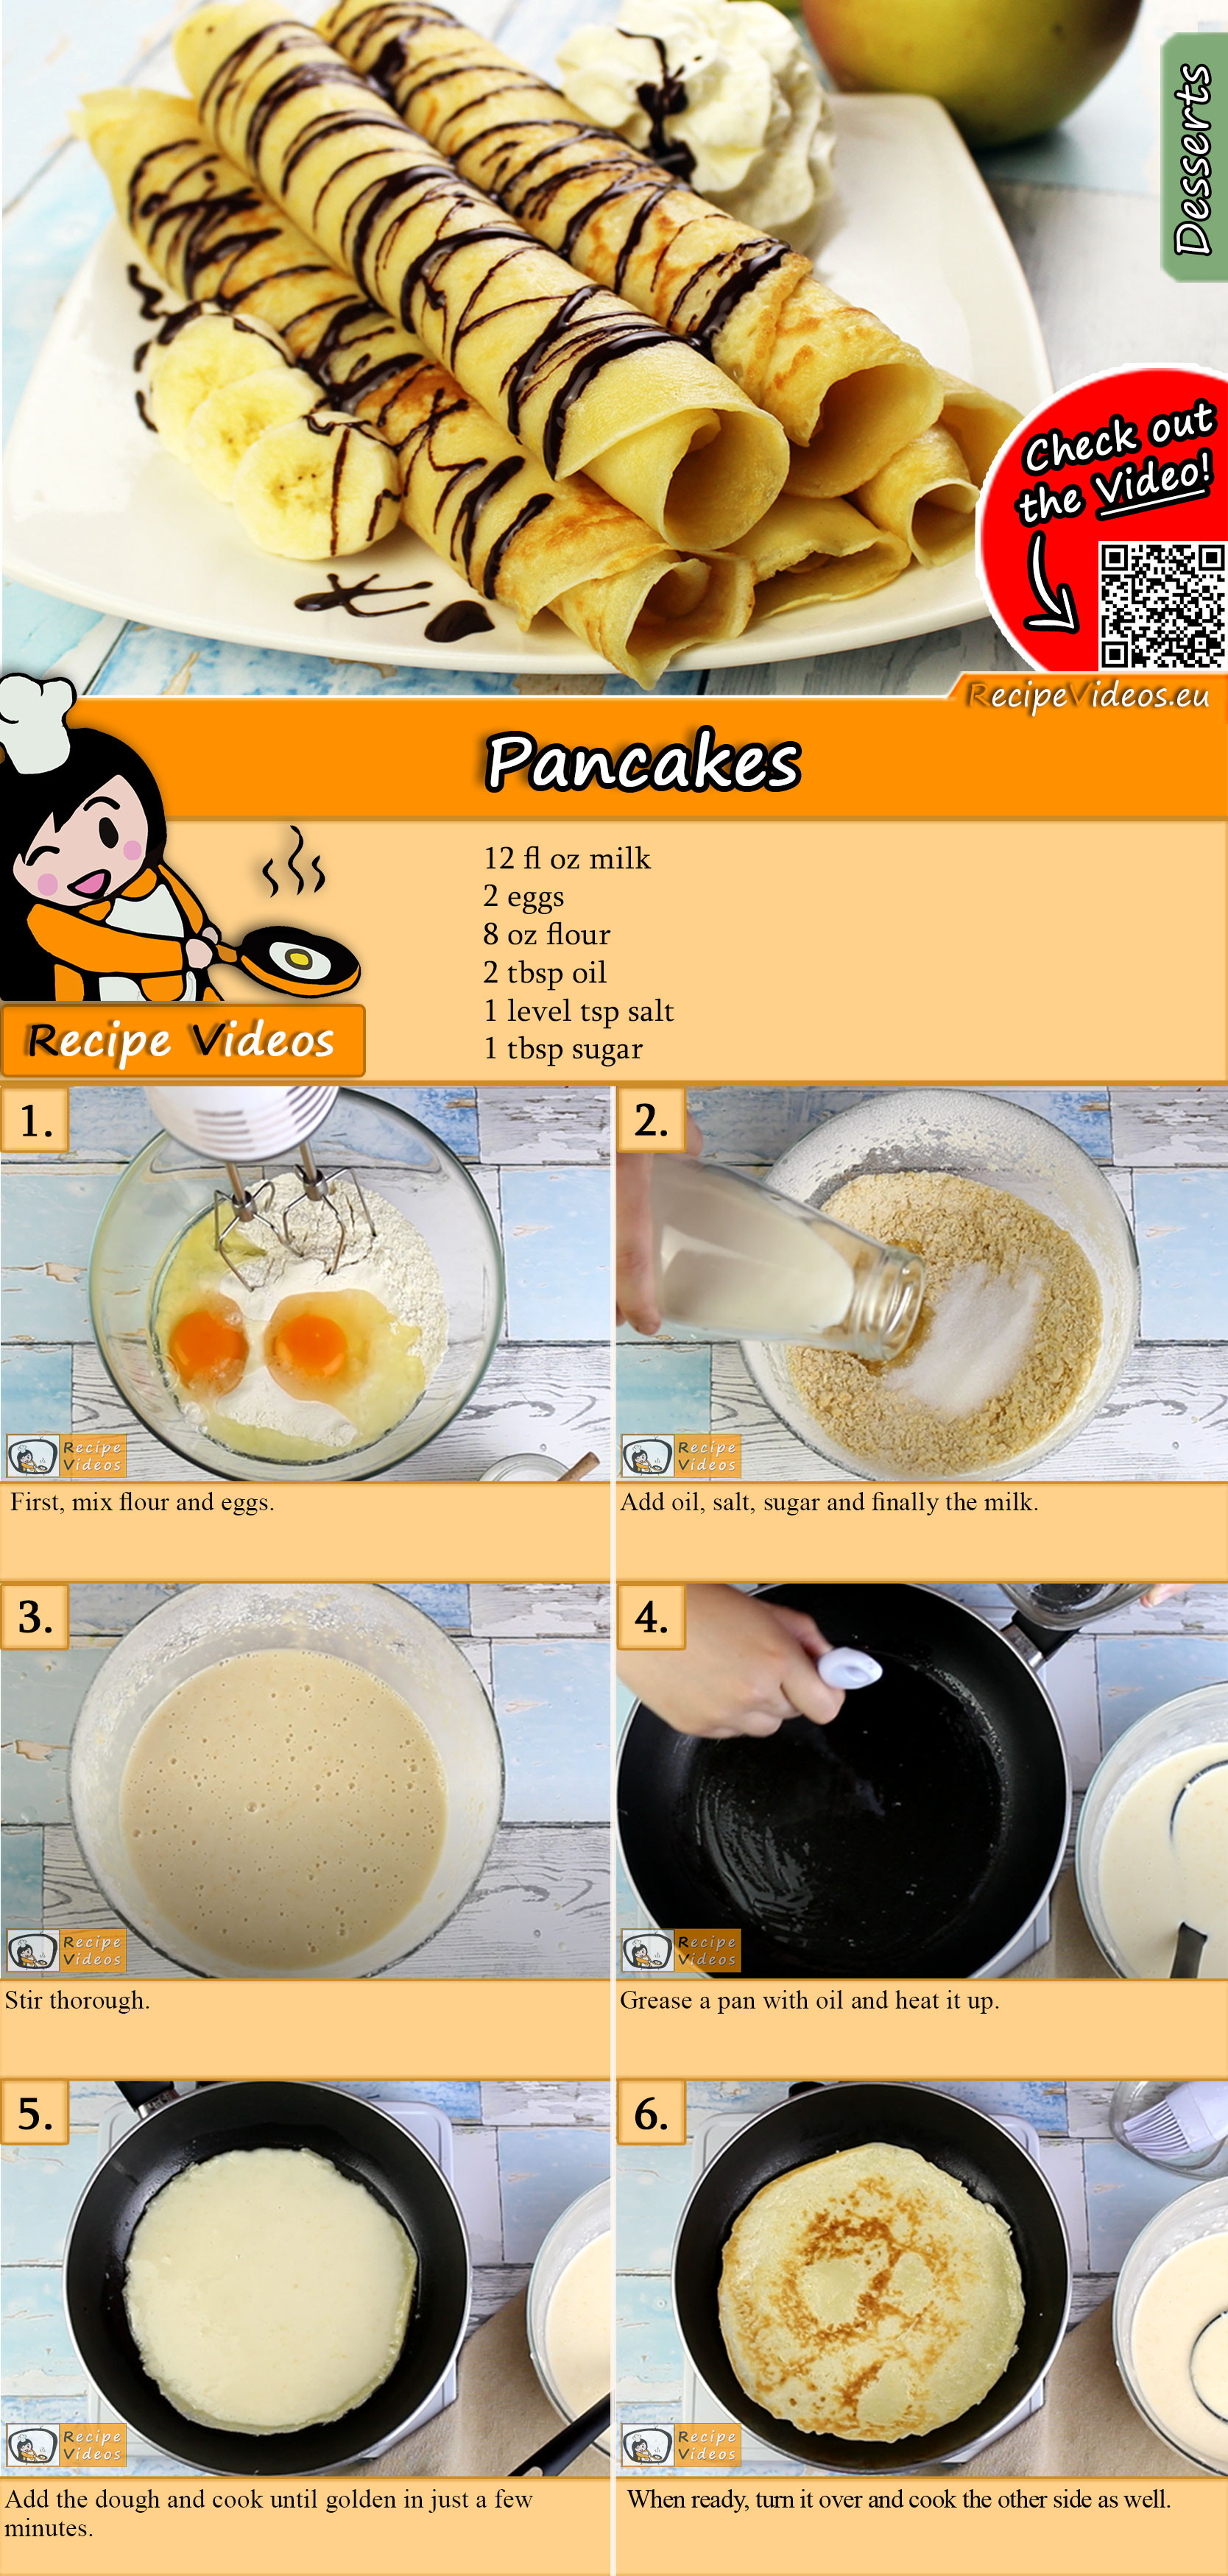 Pancakes recipe with video